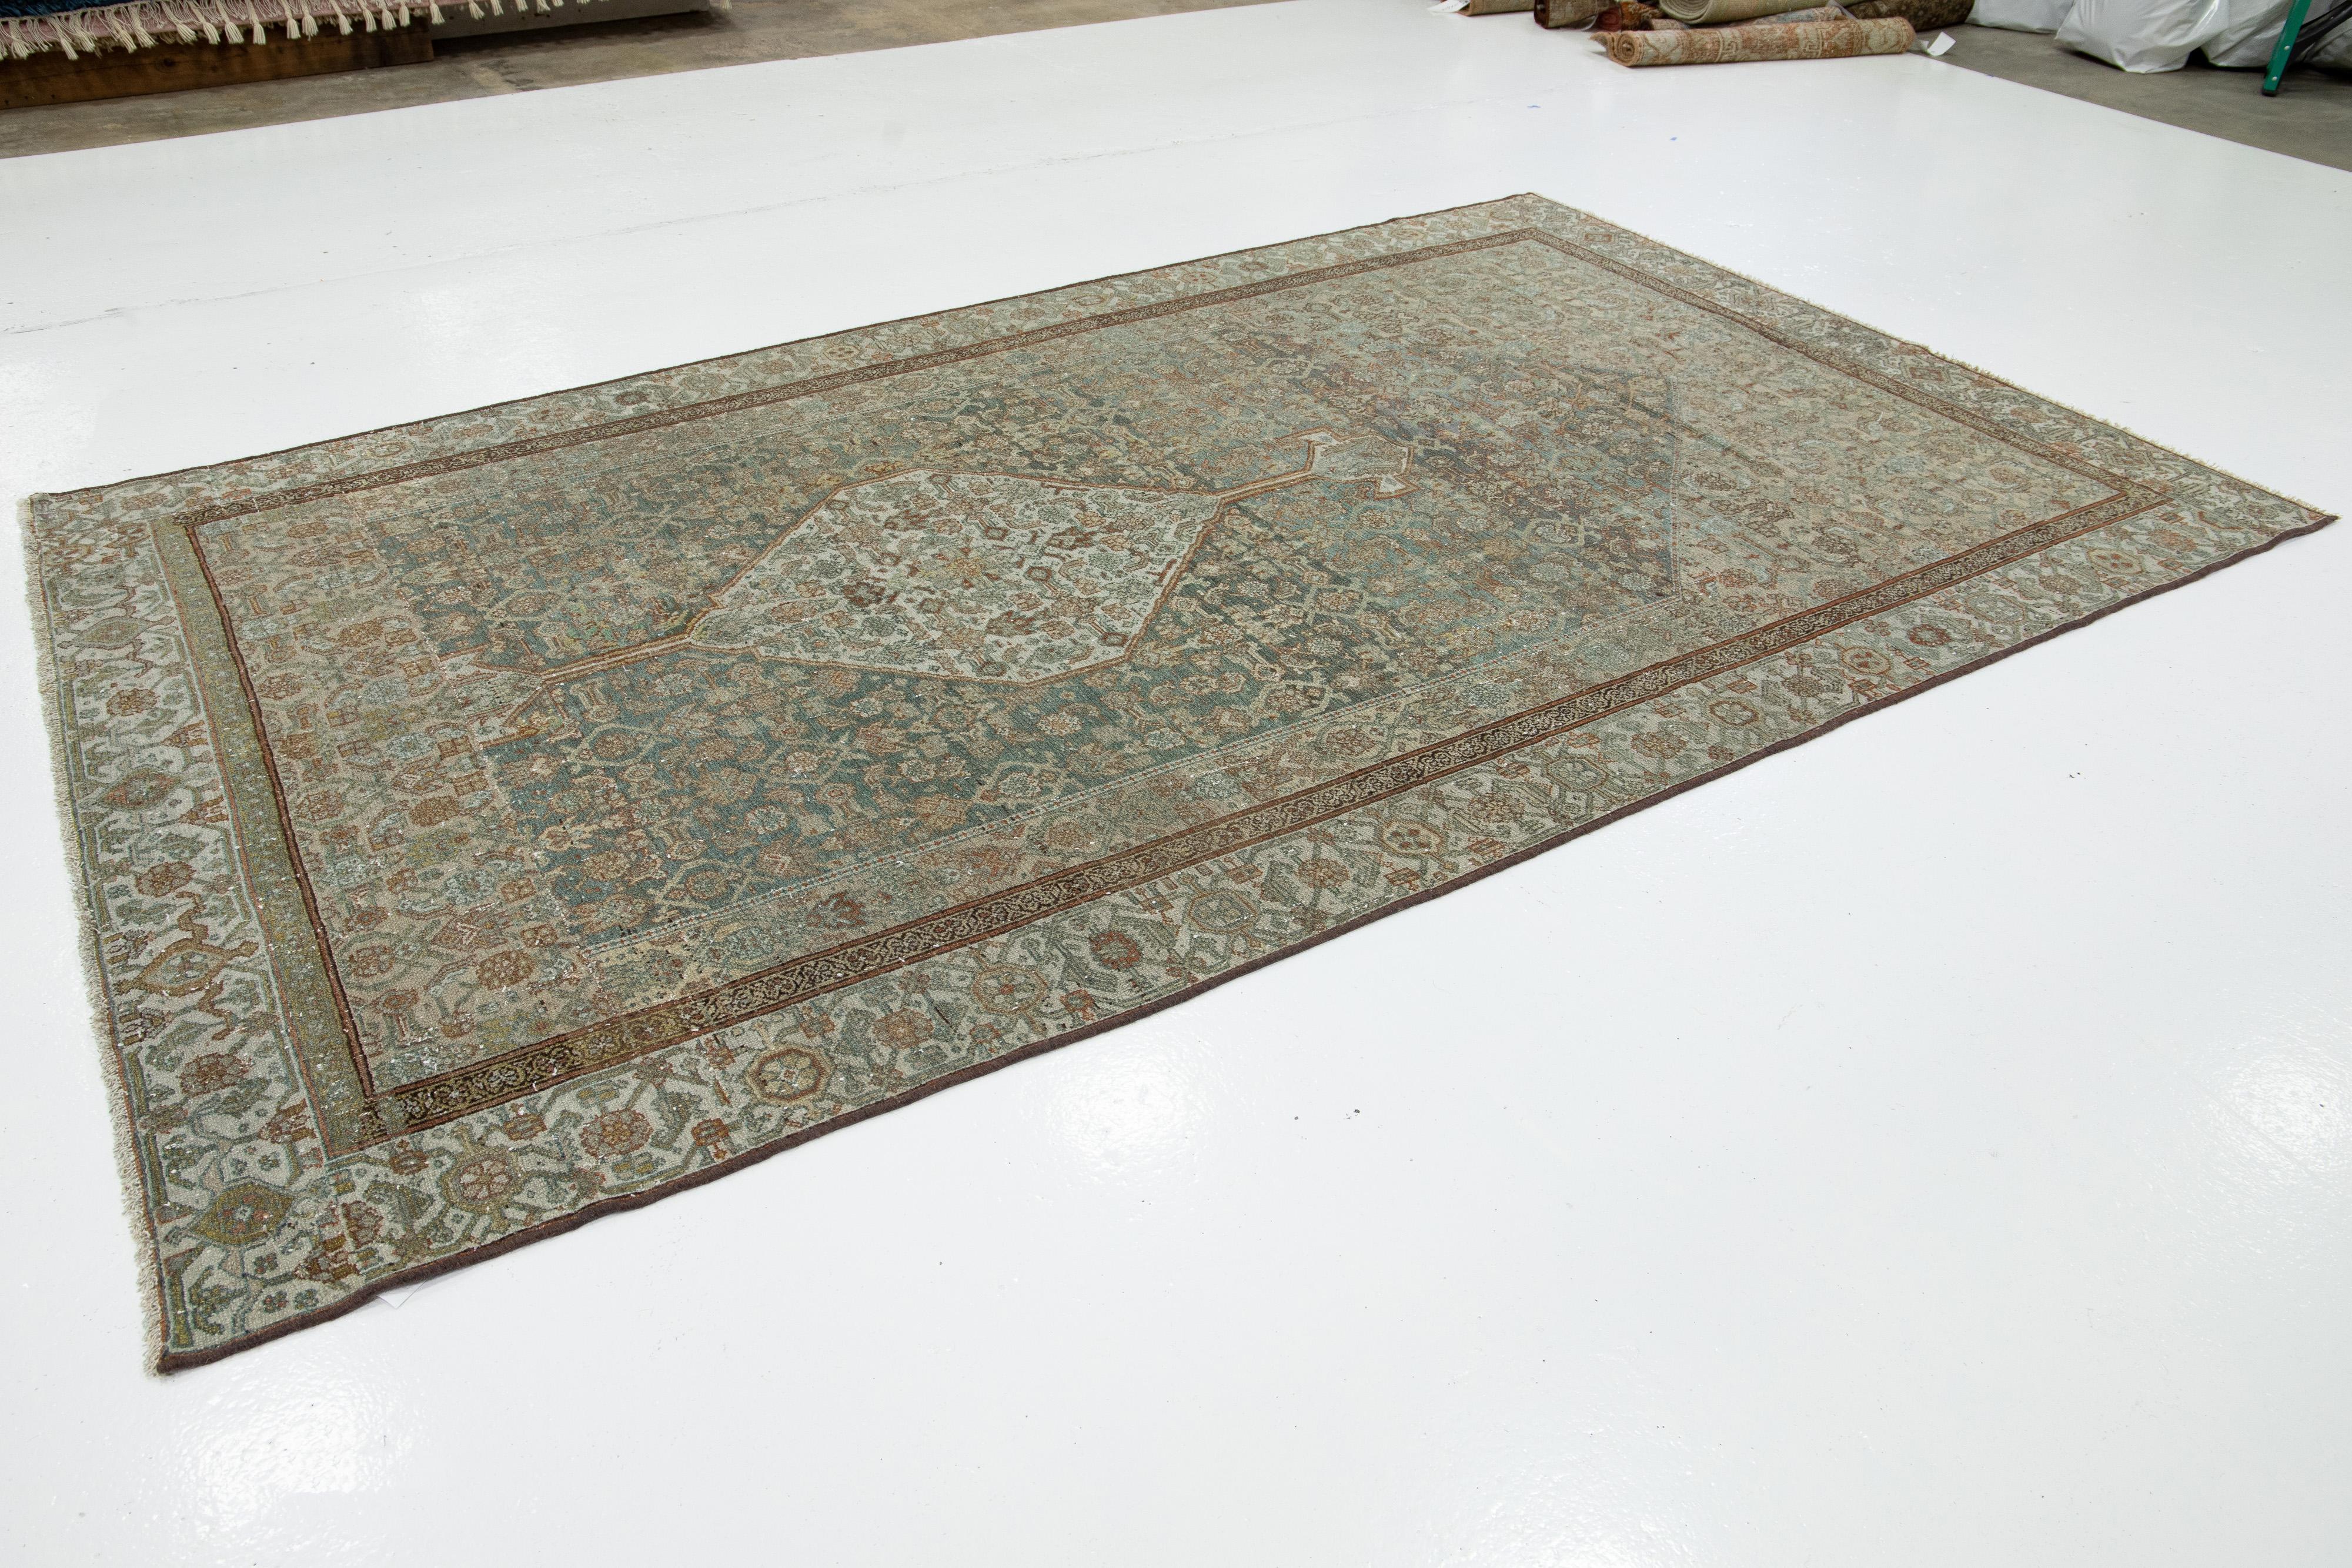 Antique Bibikabad Blue Handmade Persian Wool Rug with Allover Floral Pattern In Good Condition For Sale In Norwalk, CT